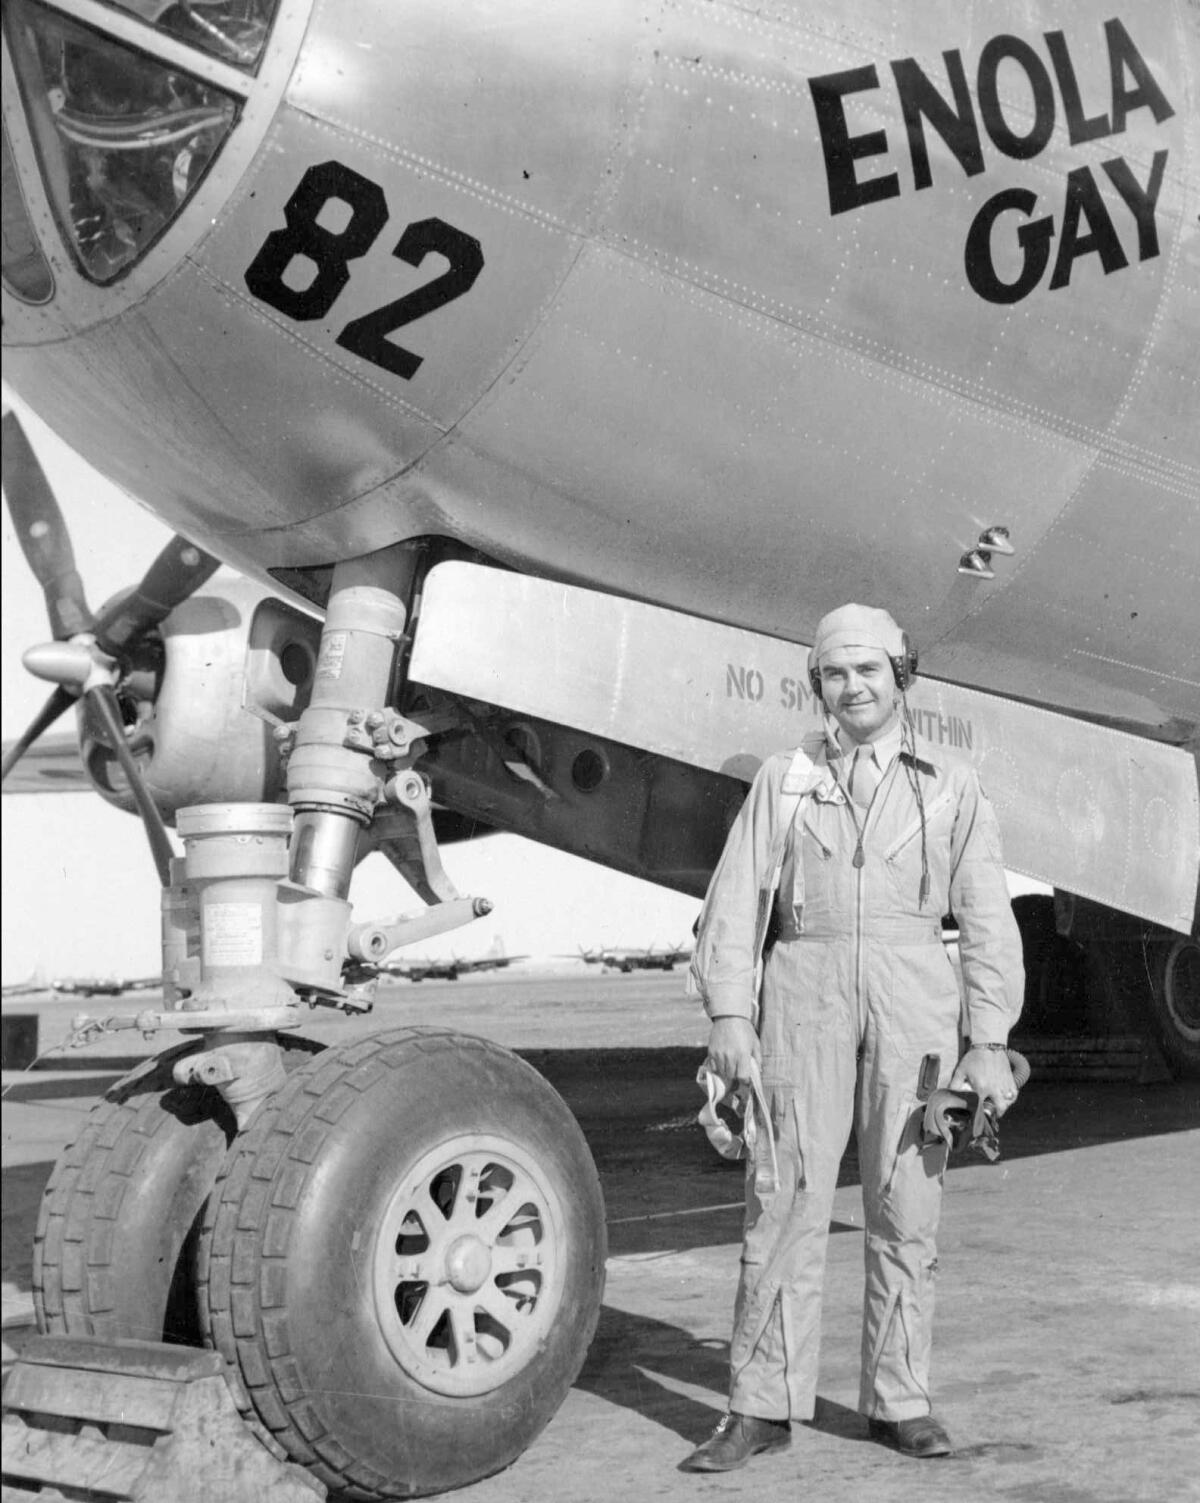 Col. Paul W. Tibbets stands beside the B–29 Superfortress bomber the Enola Gay in 1945 in an unknown location. He piloted the flight that dropped the atomic bomb on Hiroshima on Aug. 6, 1945. (Associated Press)